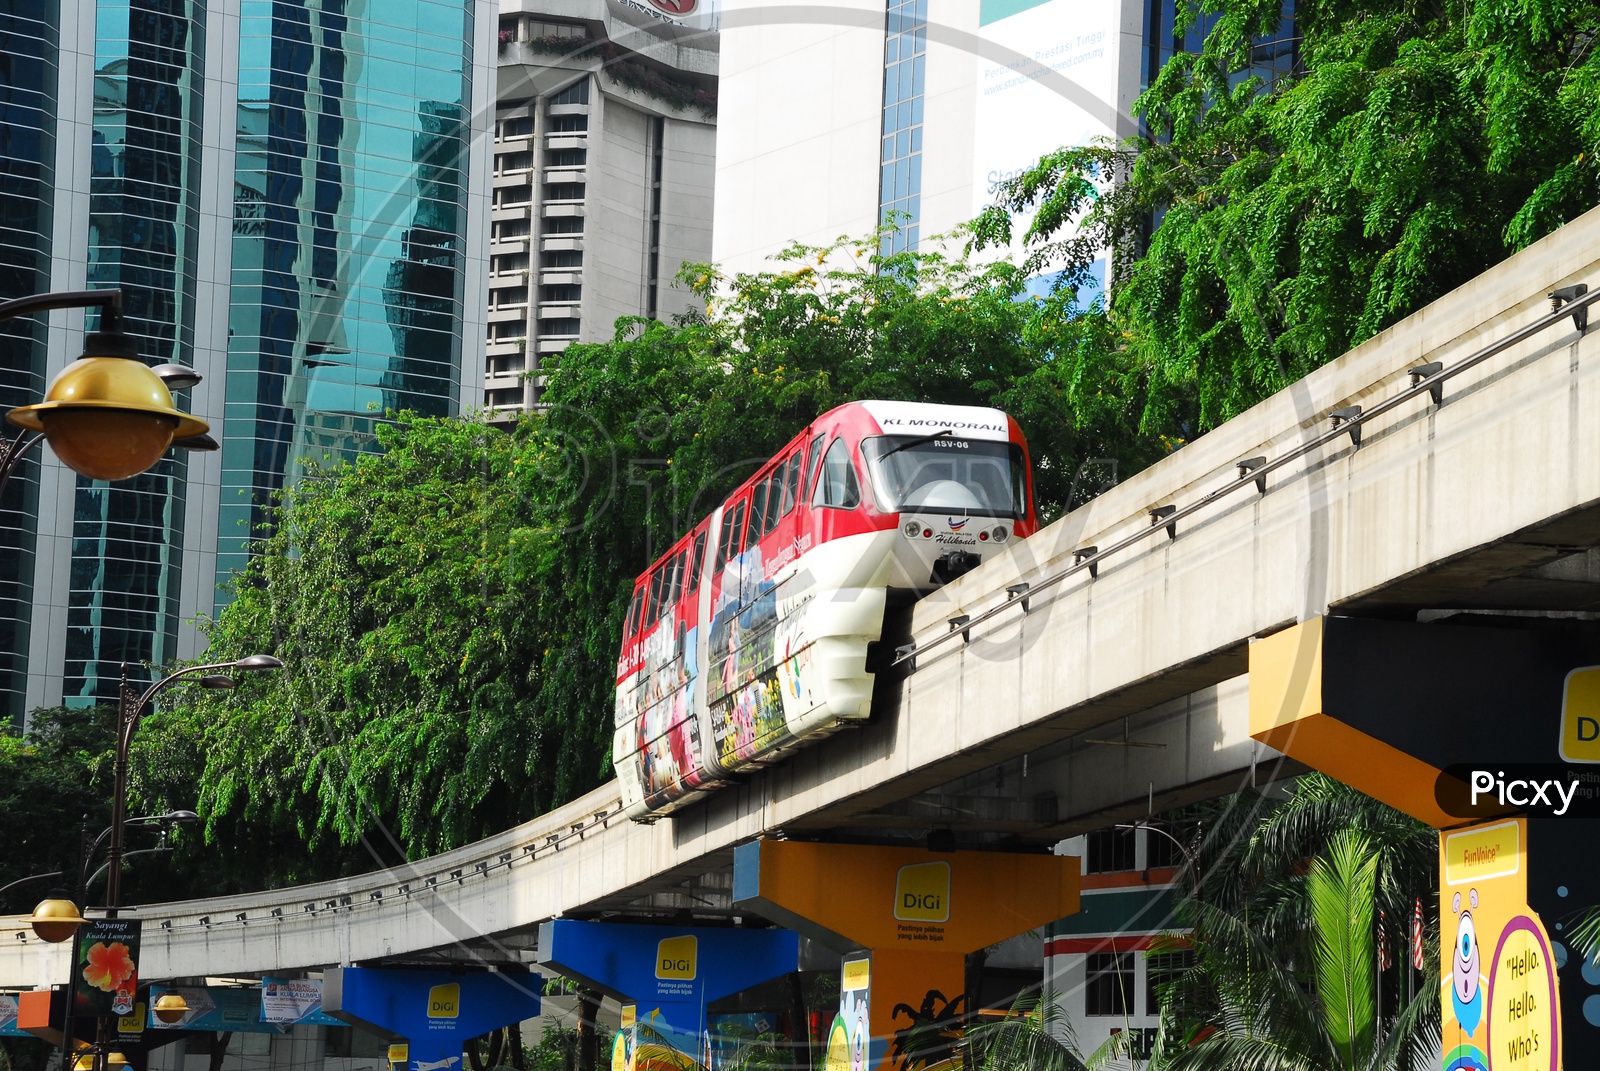 Monorail moving along the bridge way with city buildings in background